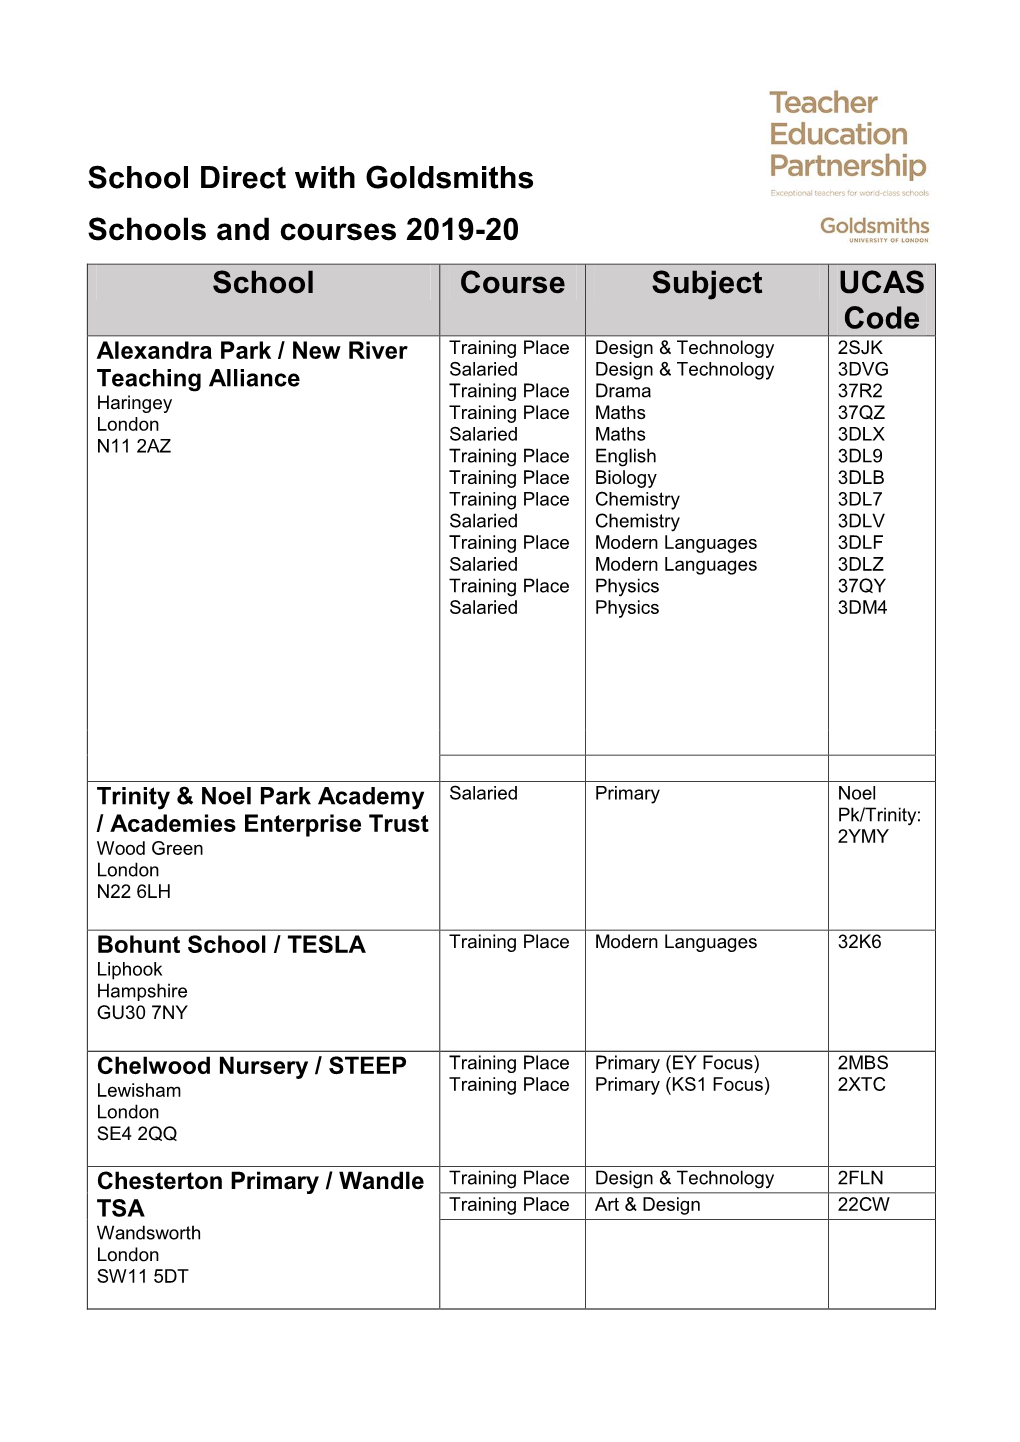 School Direct with Goldsmiths Schools and Courses 2019-20 School Course Subject UCAS Code